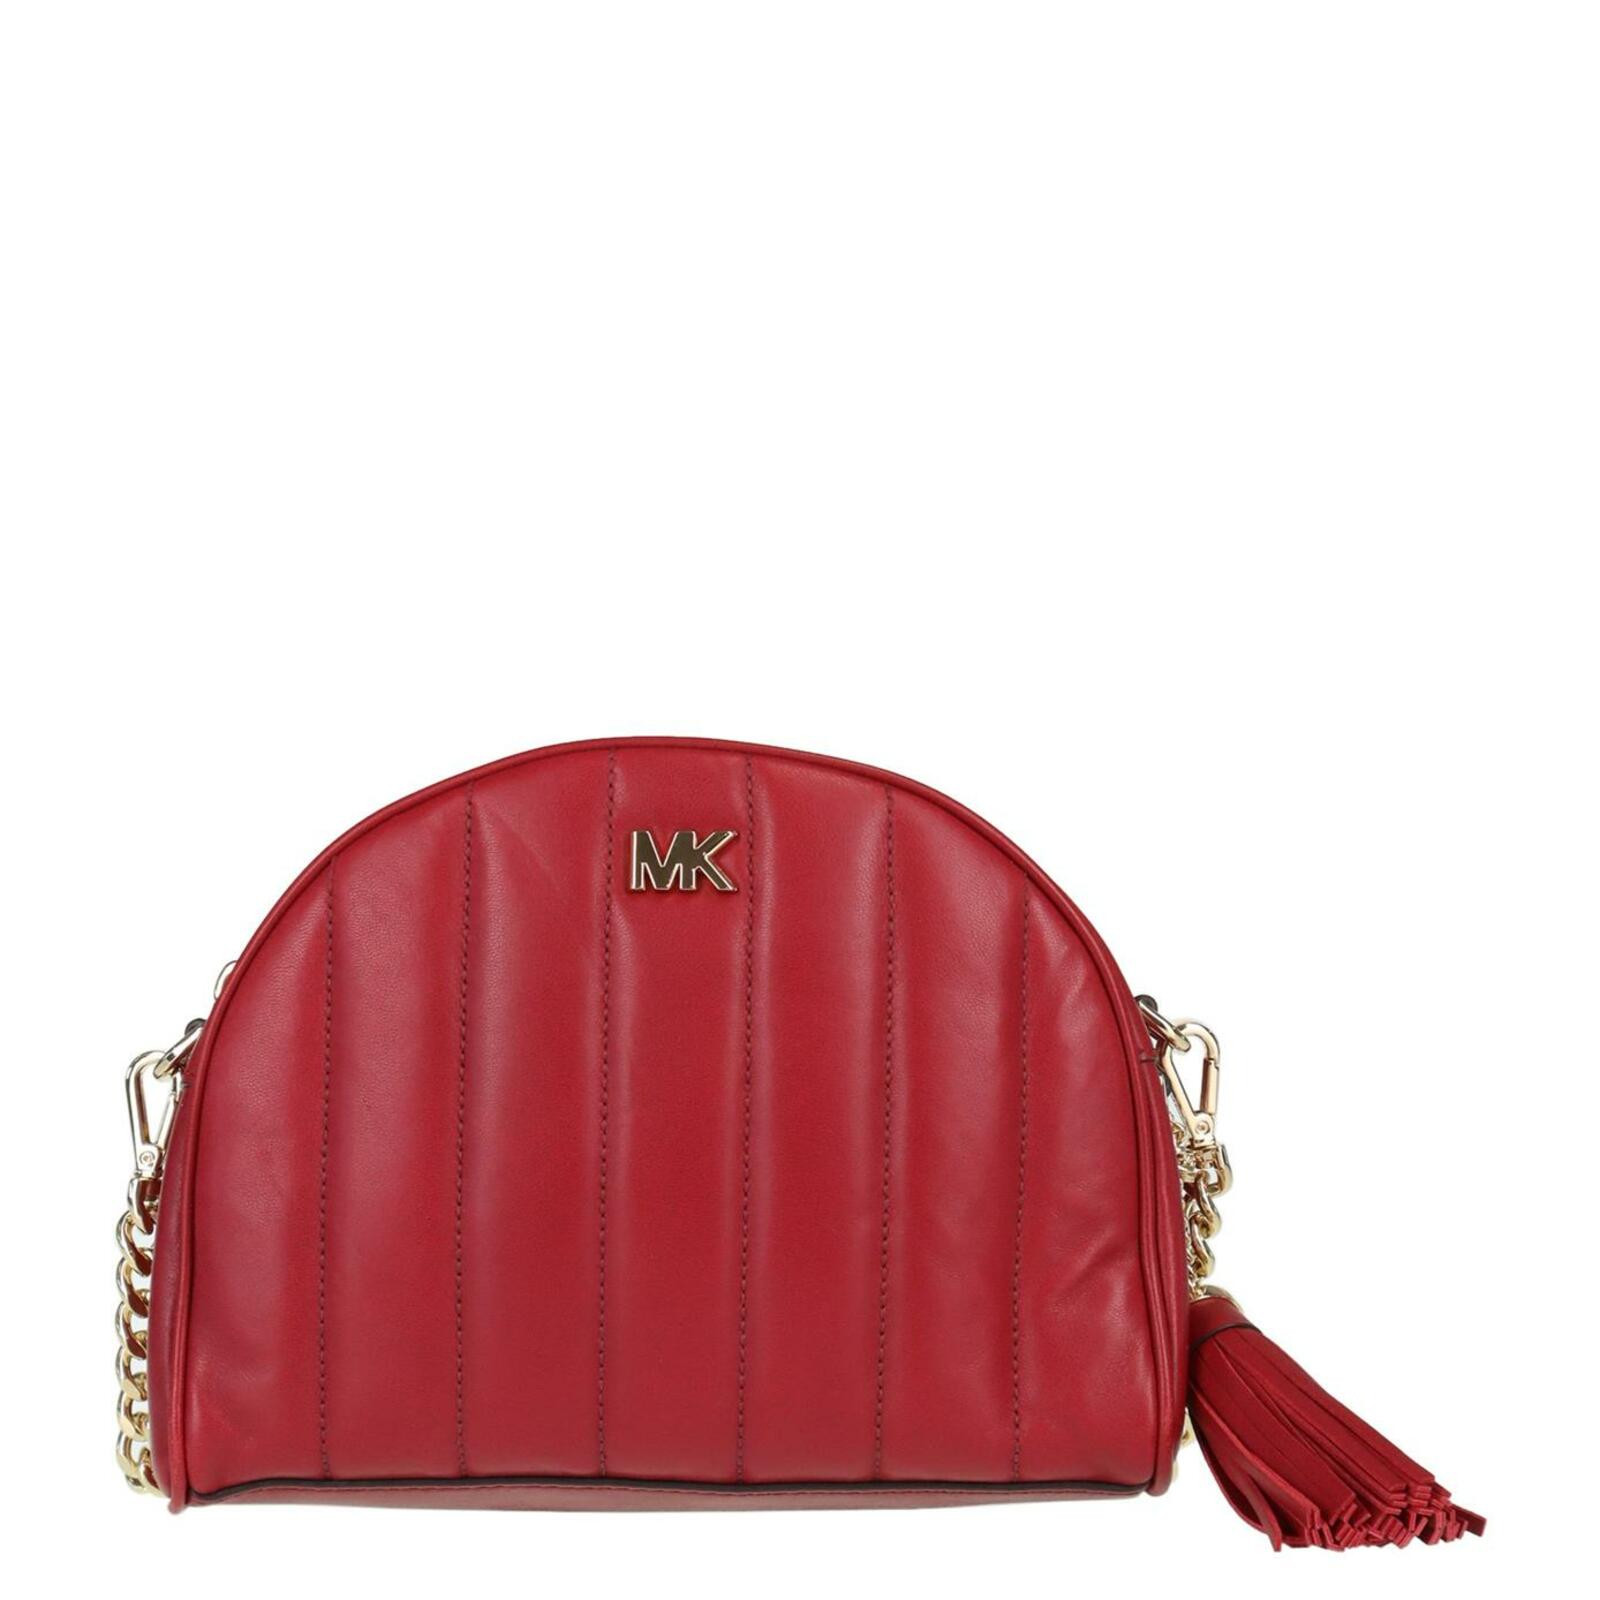 MICHAEL KORS Donna Borsa a tracolla in Pelle in Bordeaux